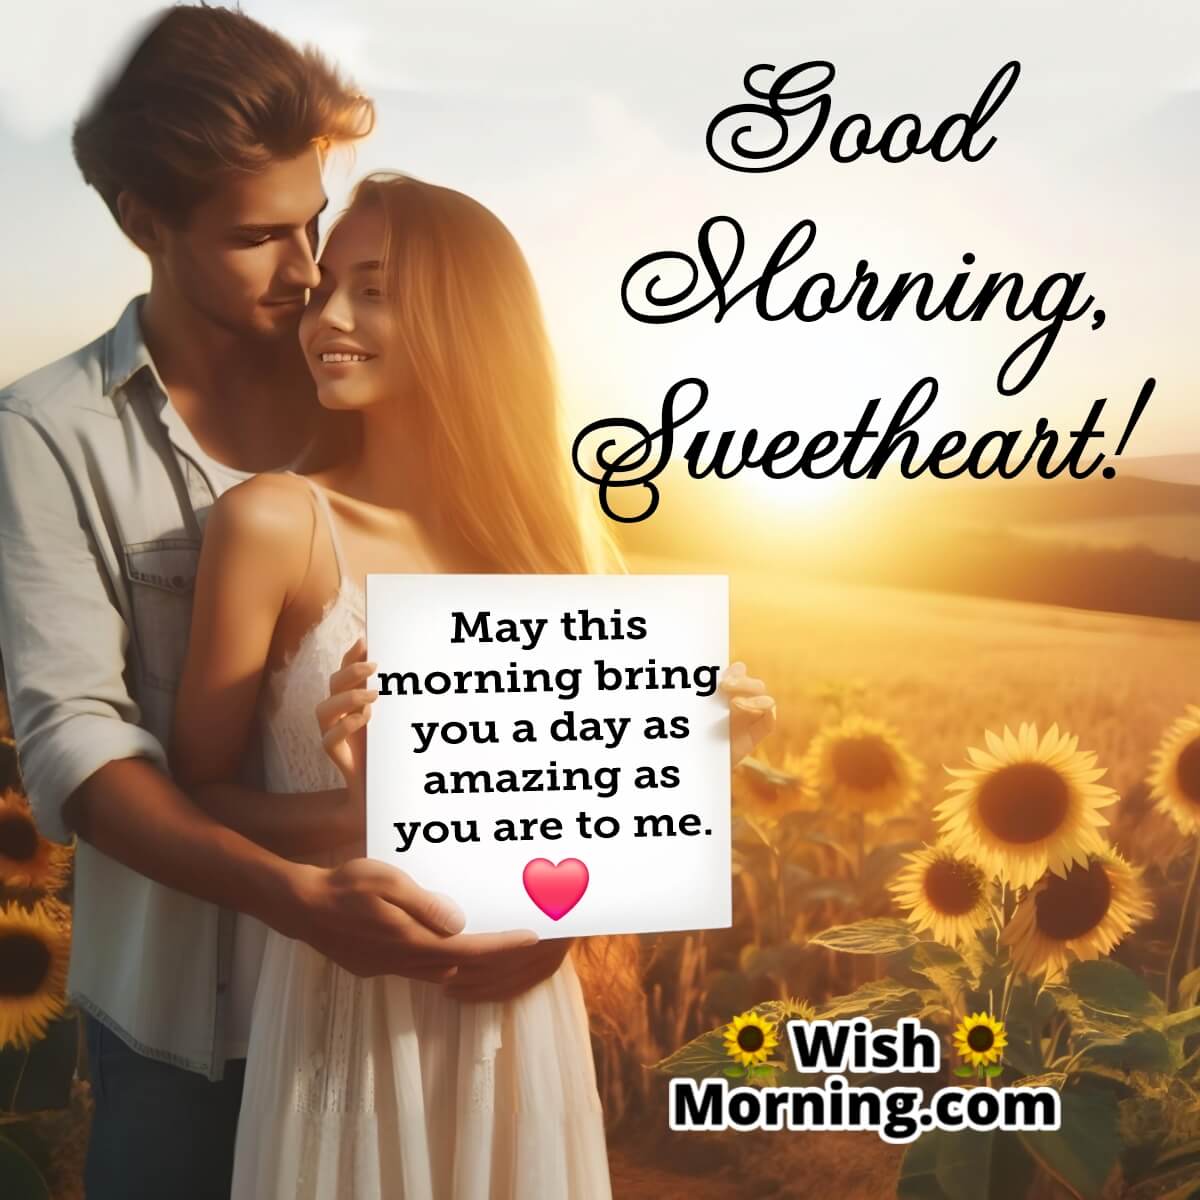 Good Morning Wish For Sweetheart